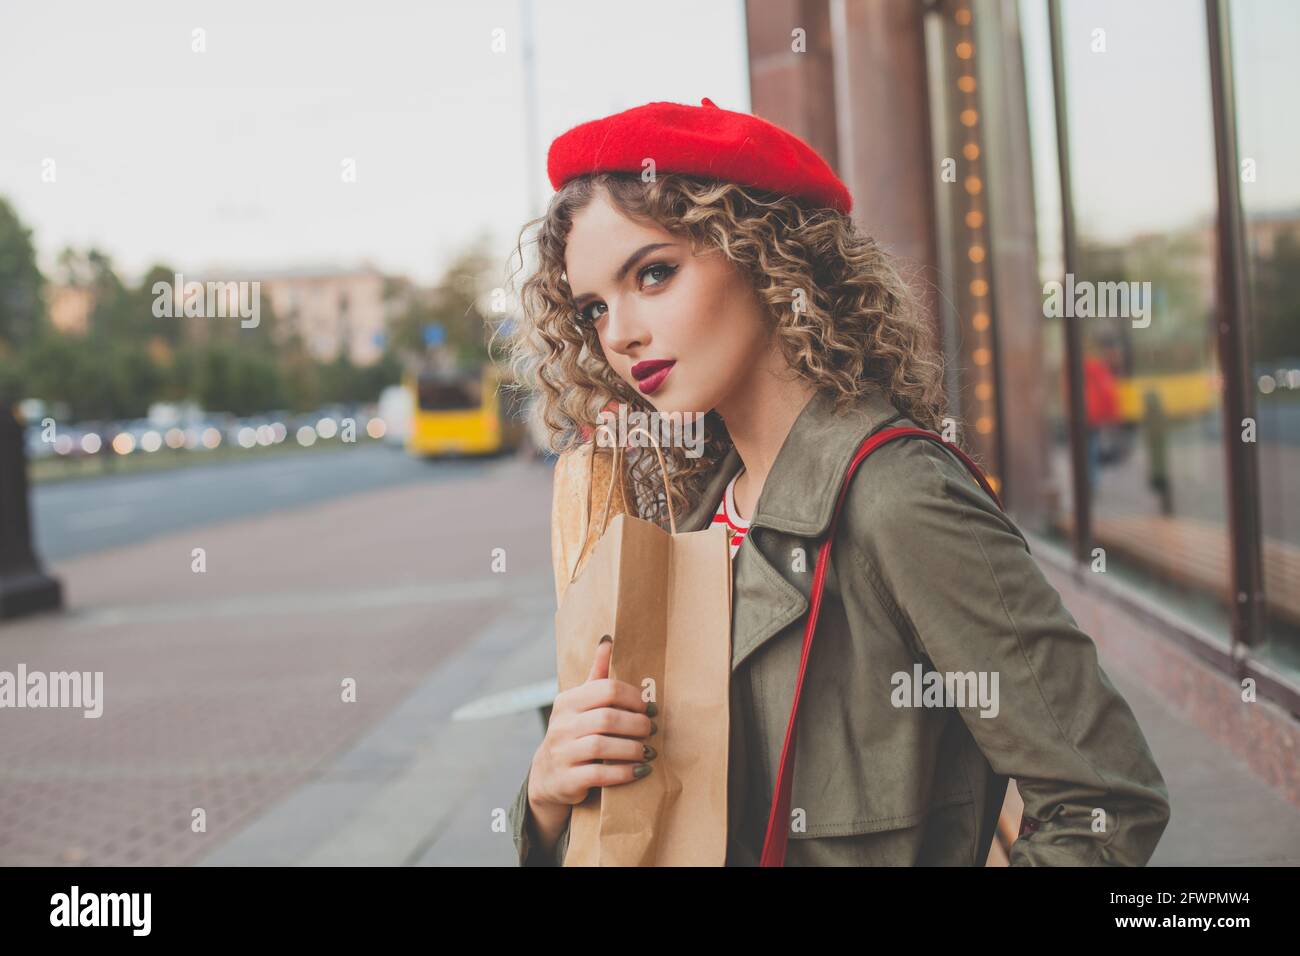 Cheerful young woman french model in red beret walking on city street ...